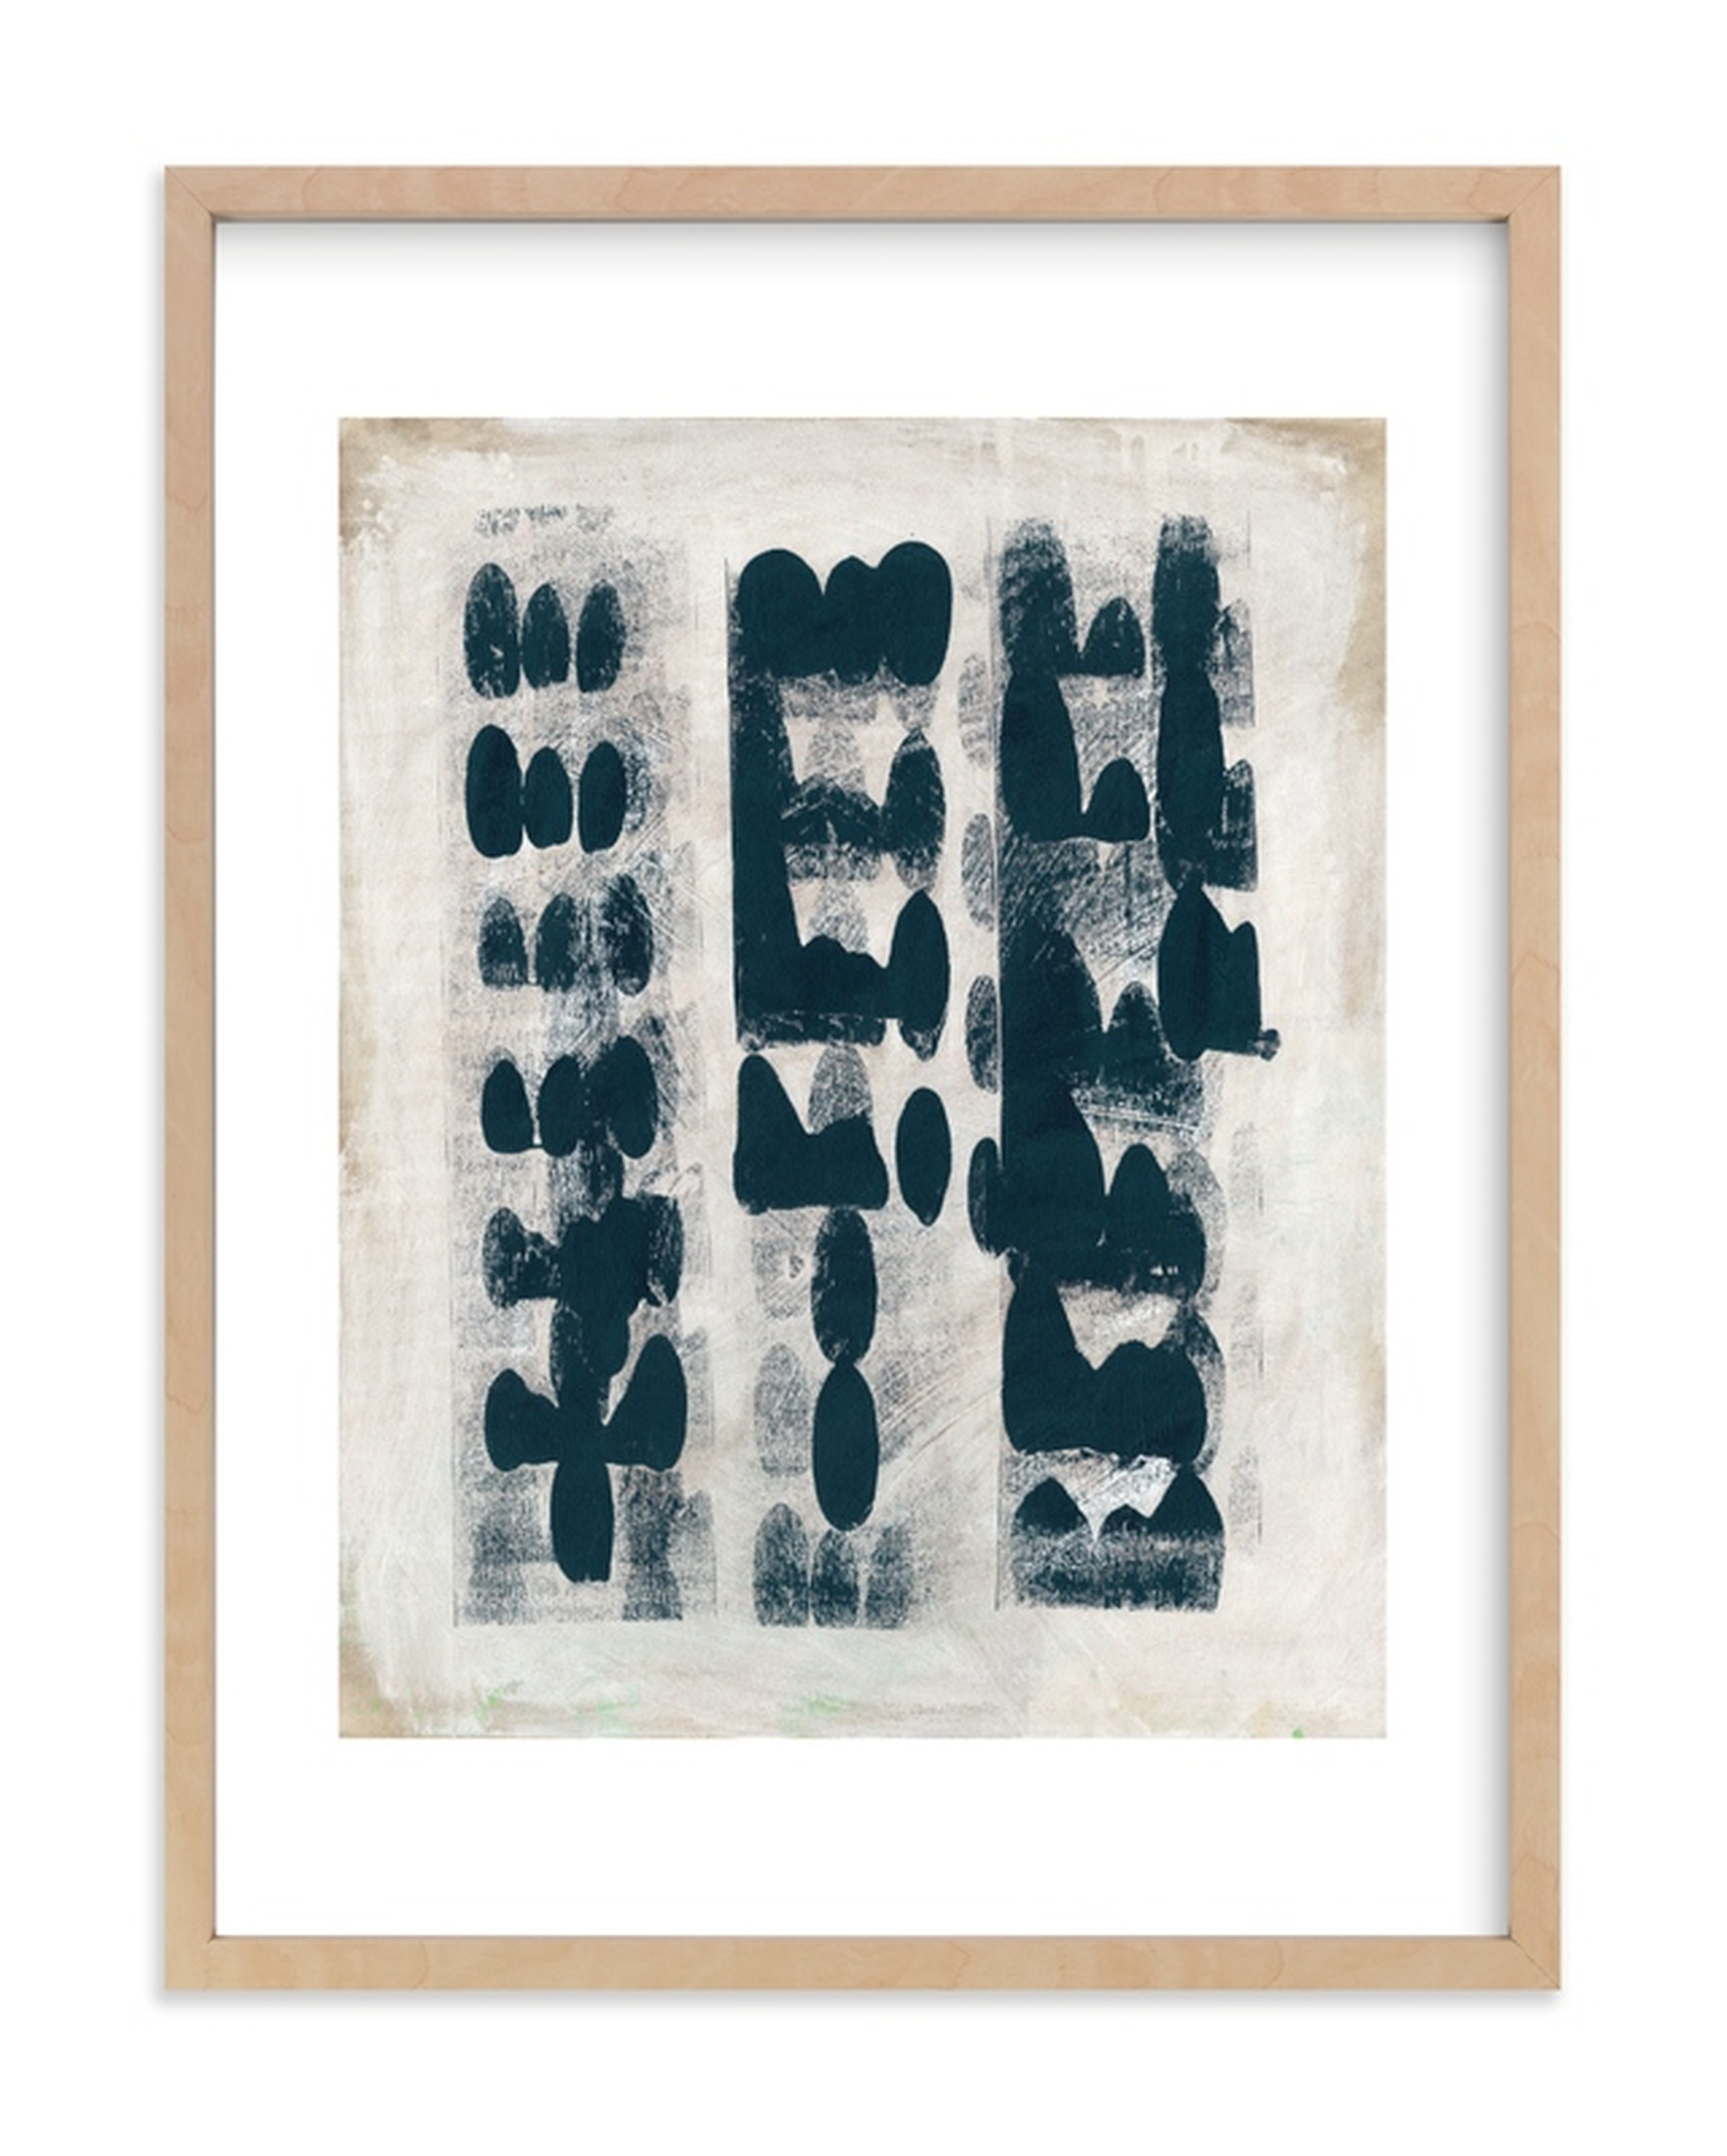 Domino Effect - DEEP SEA 18 X 24" NATURAL WOOD FRAME - Minted